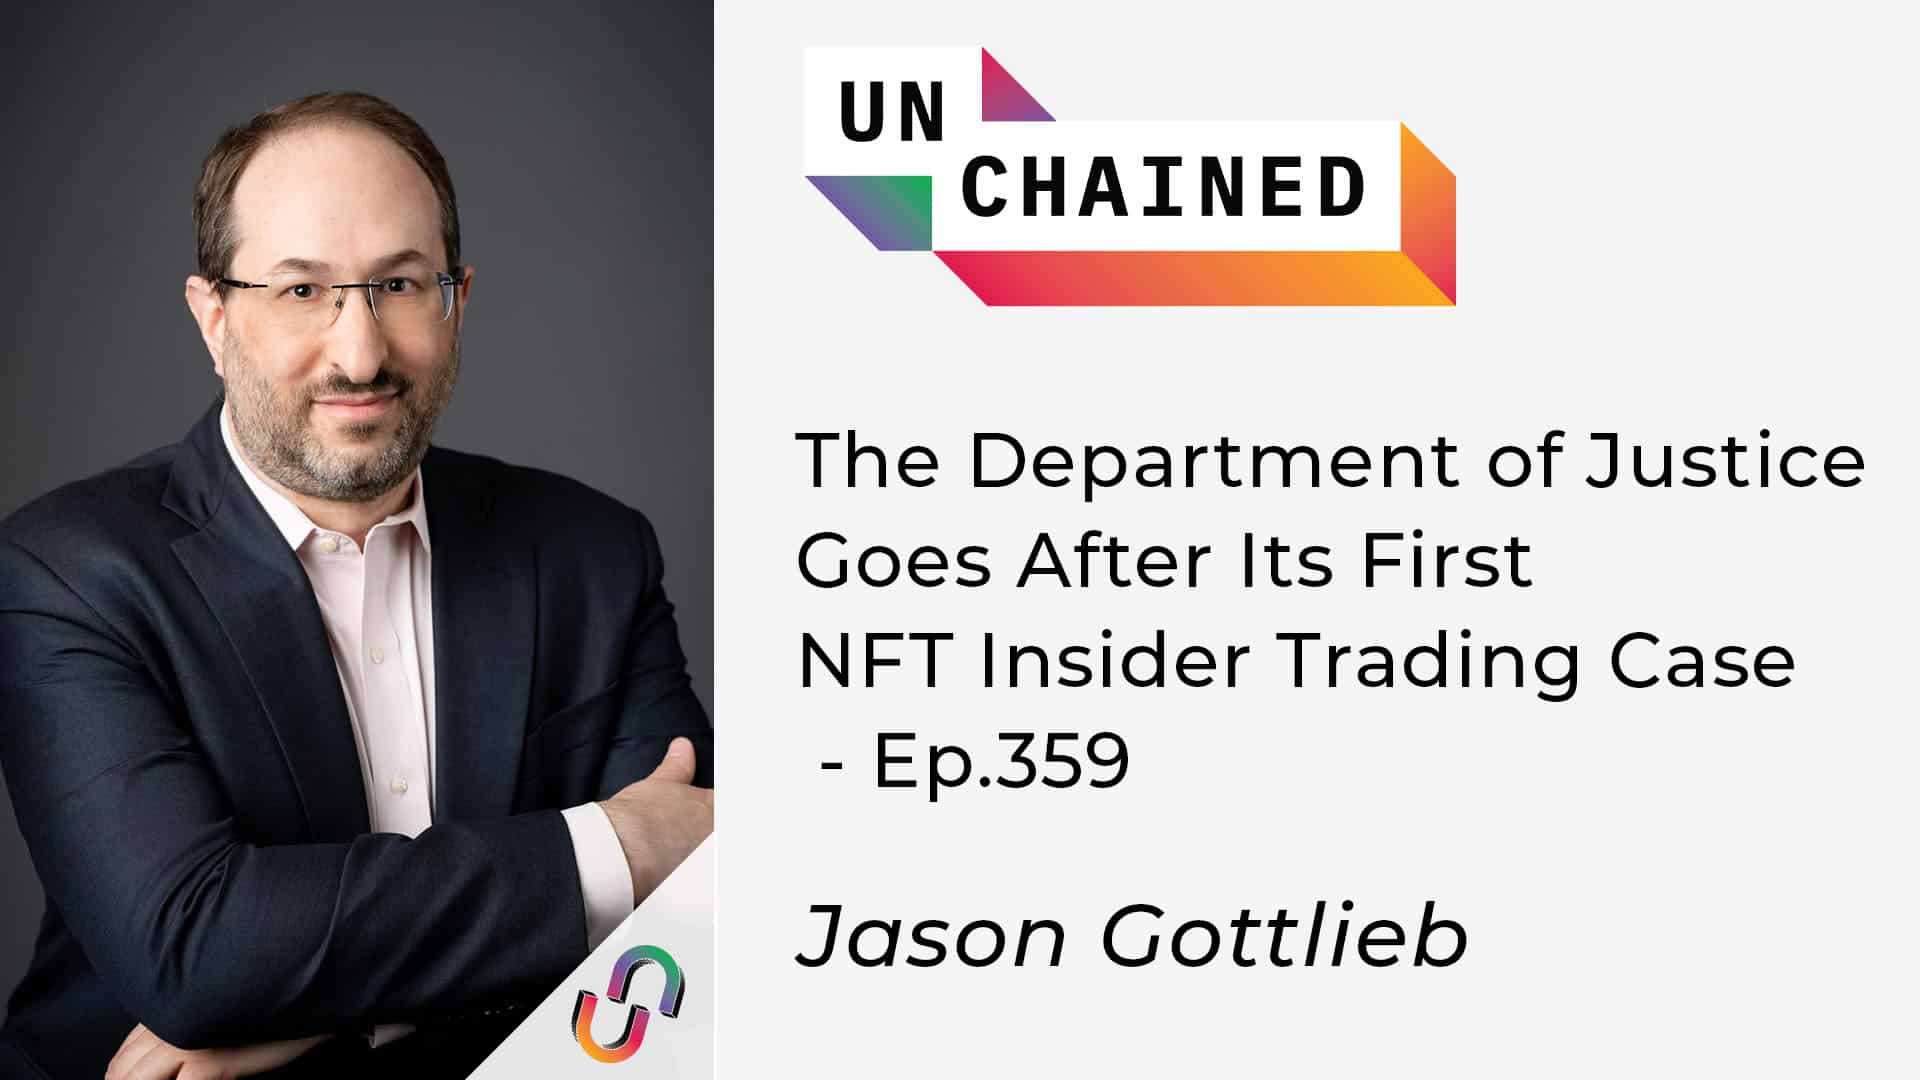 The Department of Justice Goes After Its First NFT Insider Trading Case - Ep 359